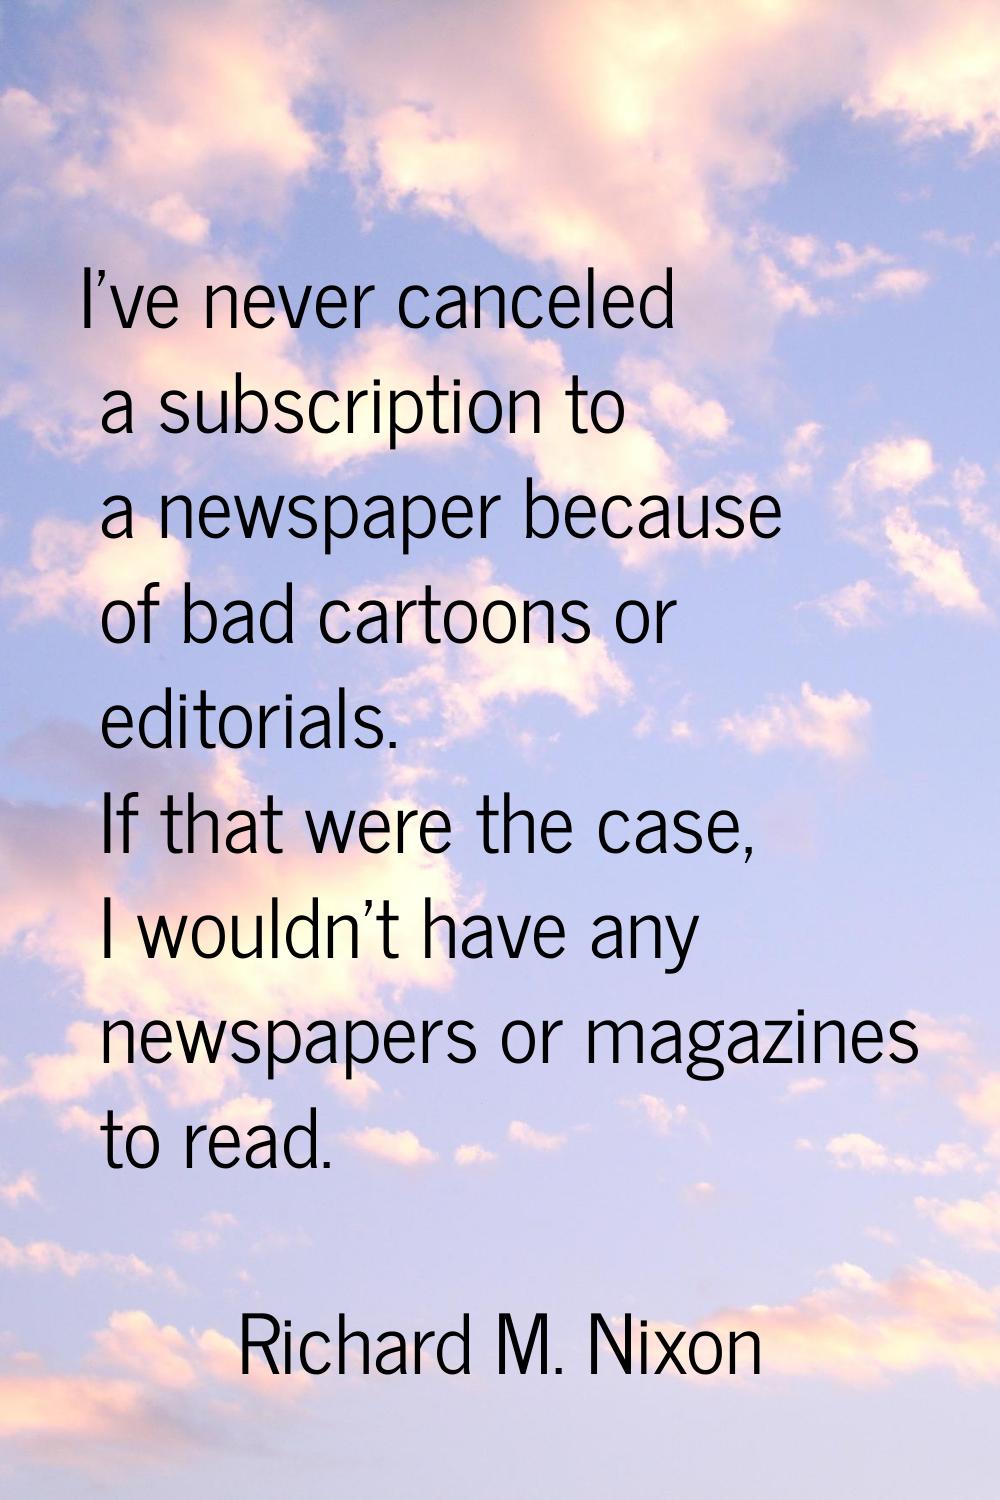 I've never canceled a subscription to a newspaper because of bad cartoons or editorials. If that we